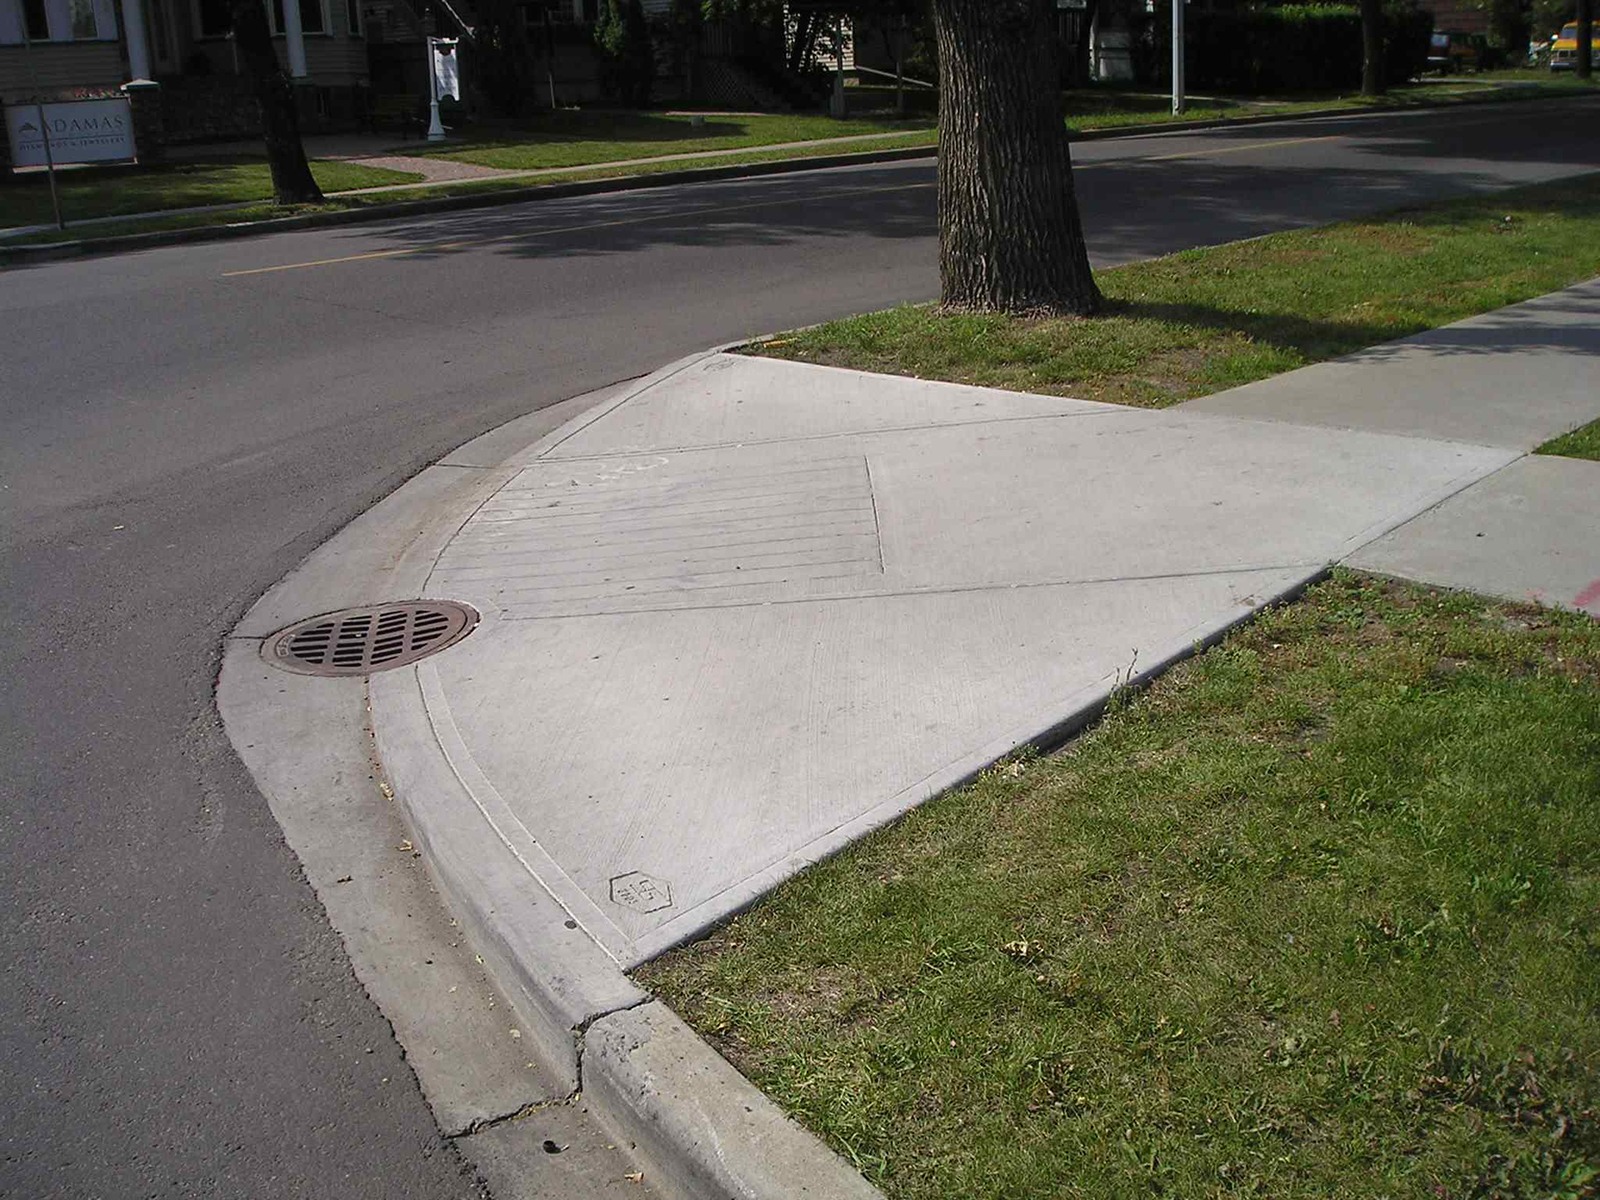 A curb ramp at the corner of a road